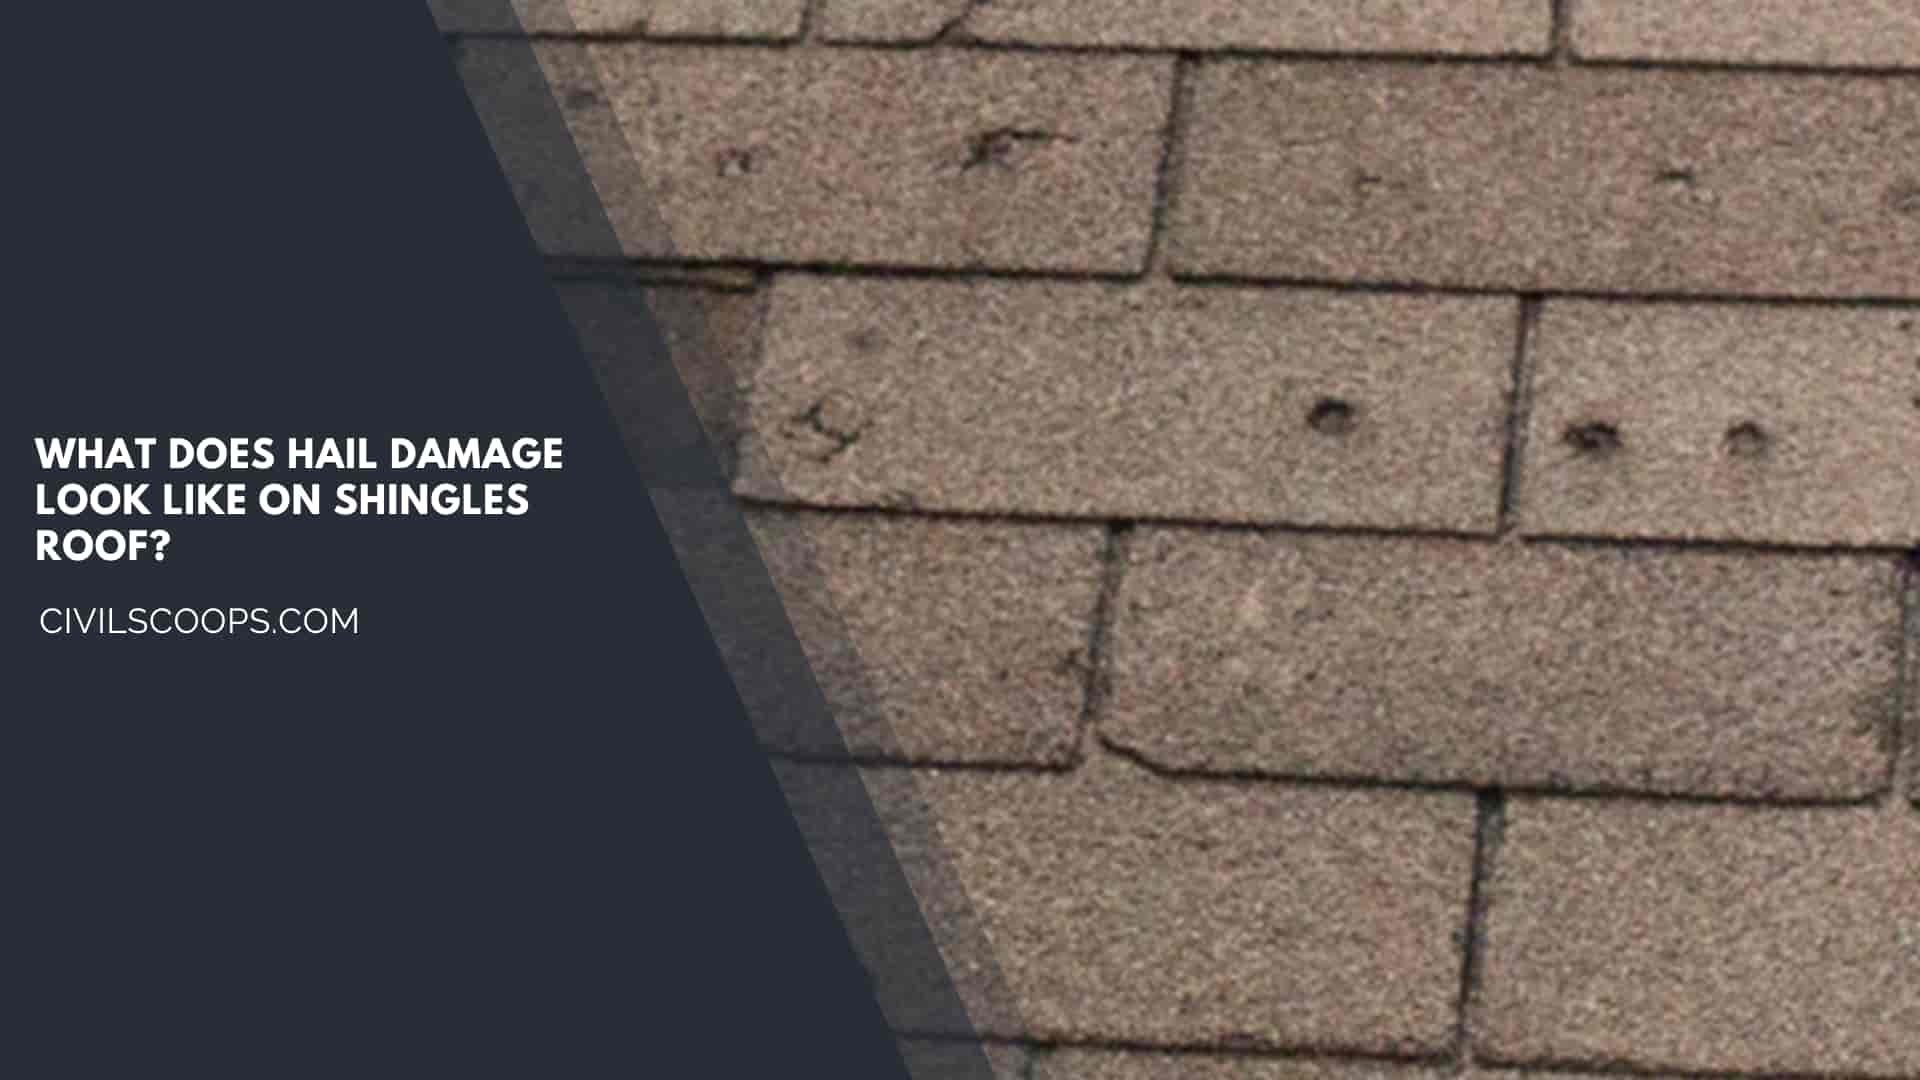 What Does Hail Damage Look Like on Shingles Roof?